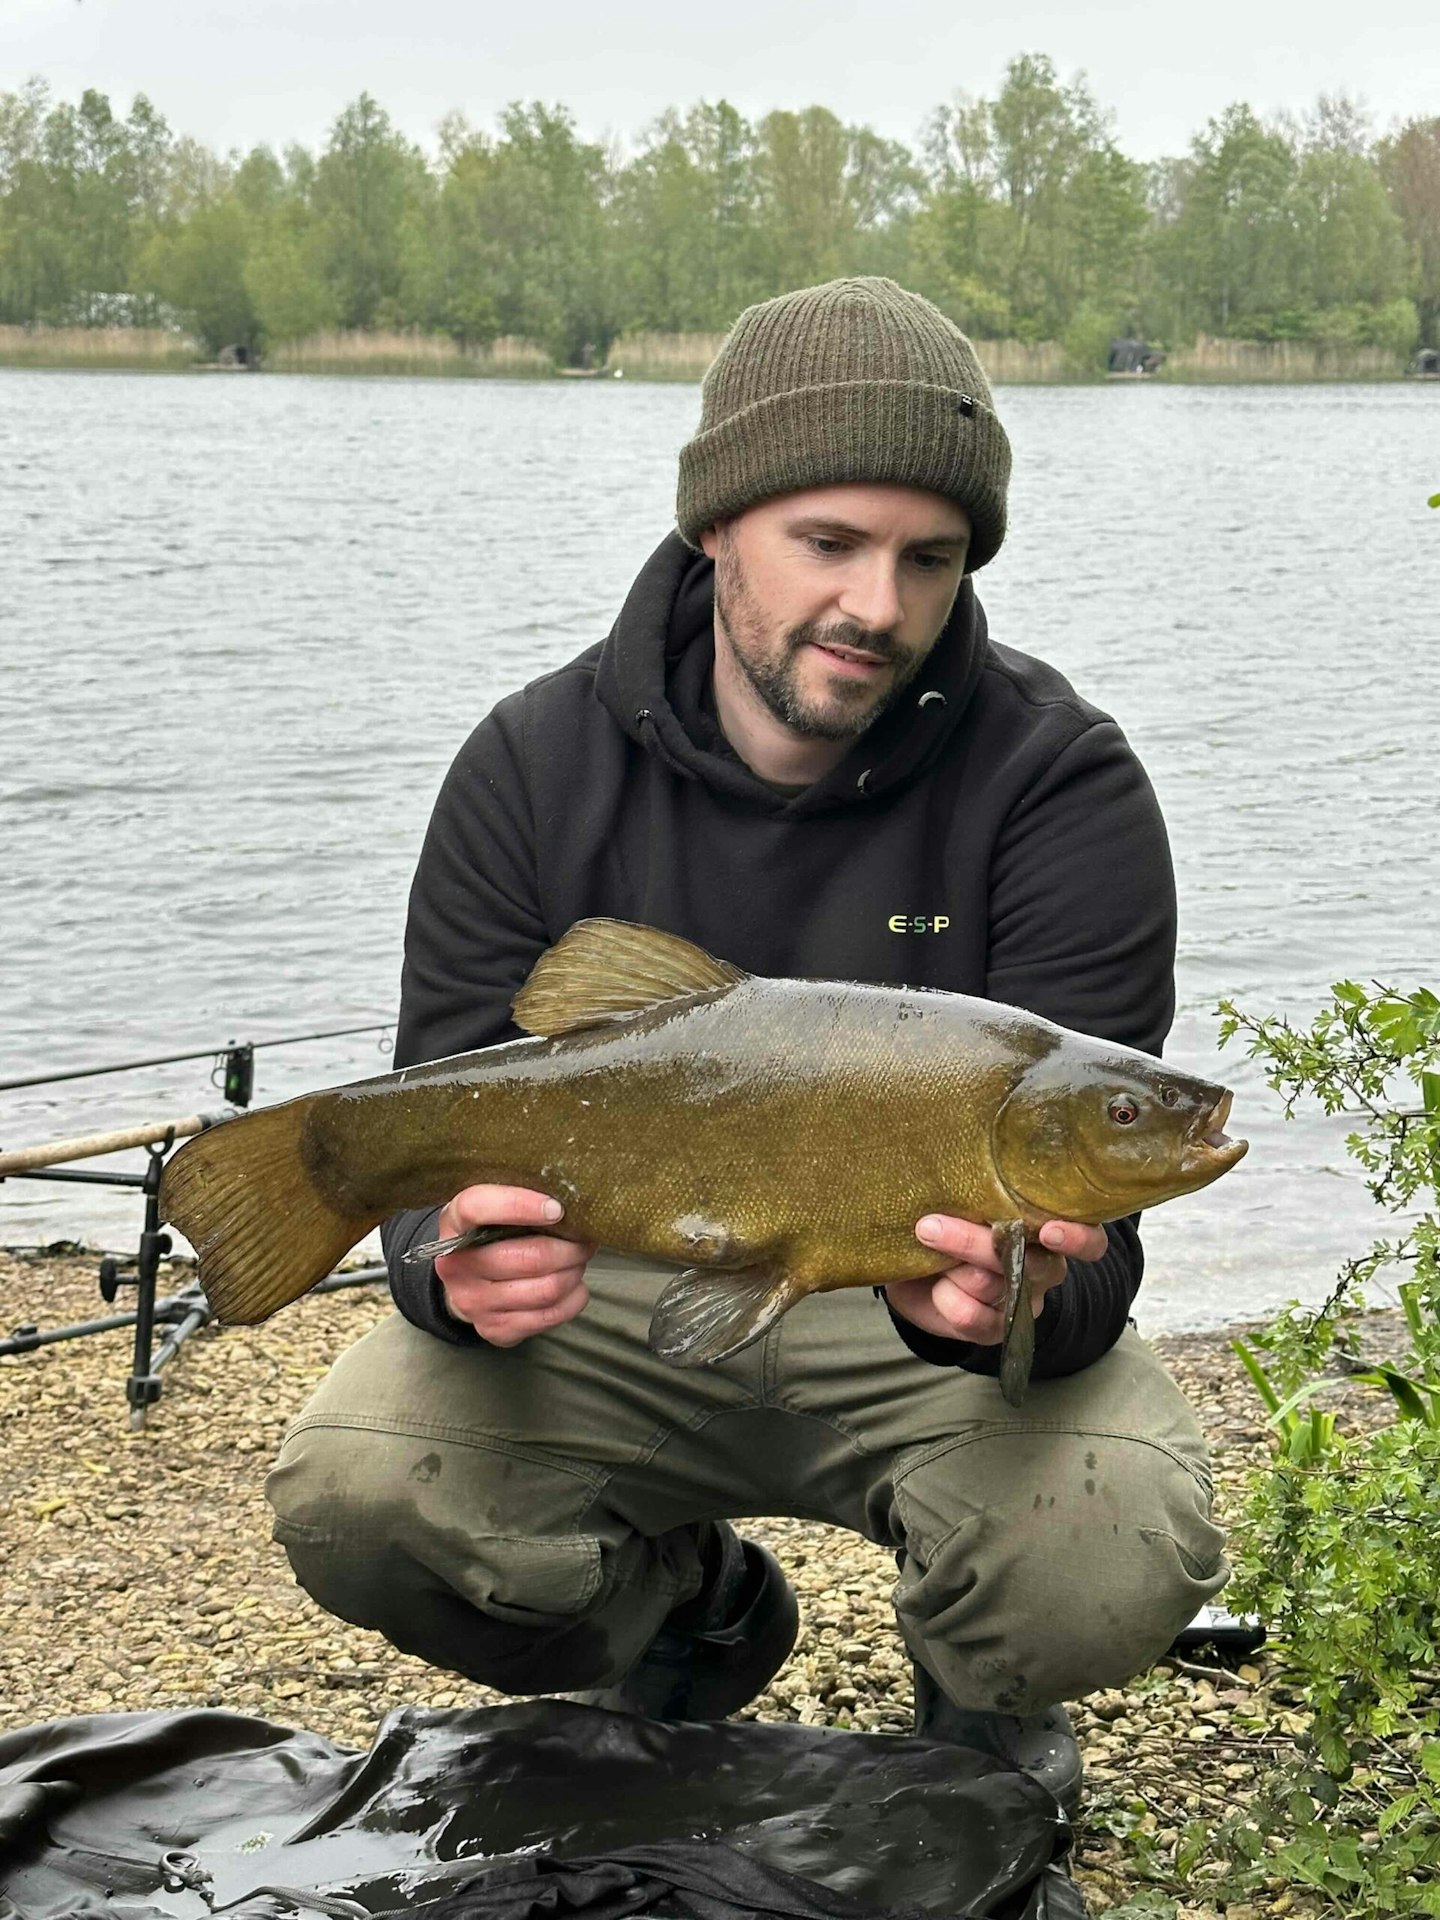 Lots of tench are expected to be caught in this years competition.